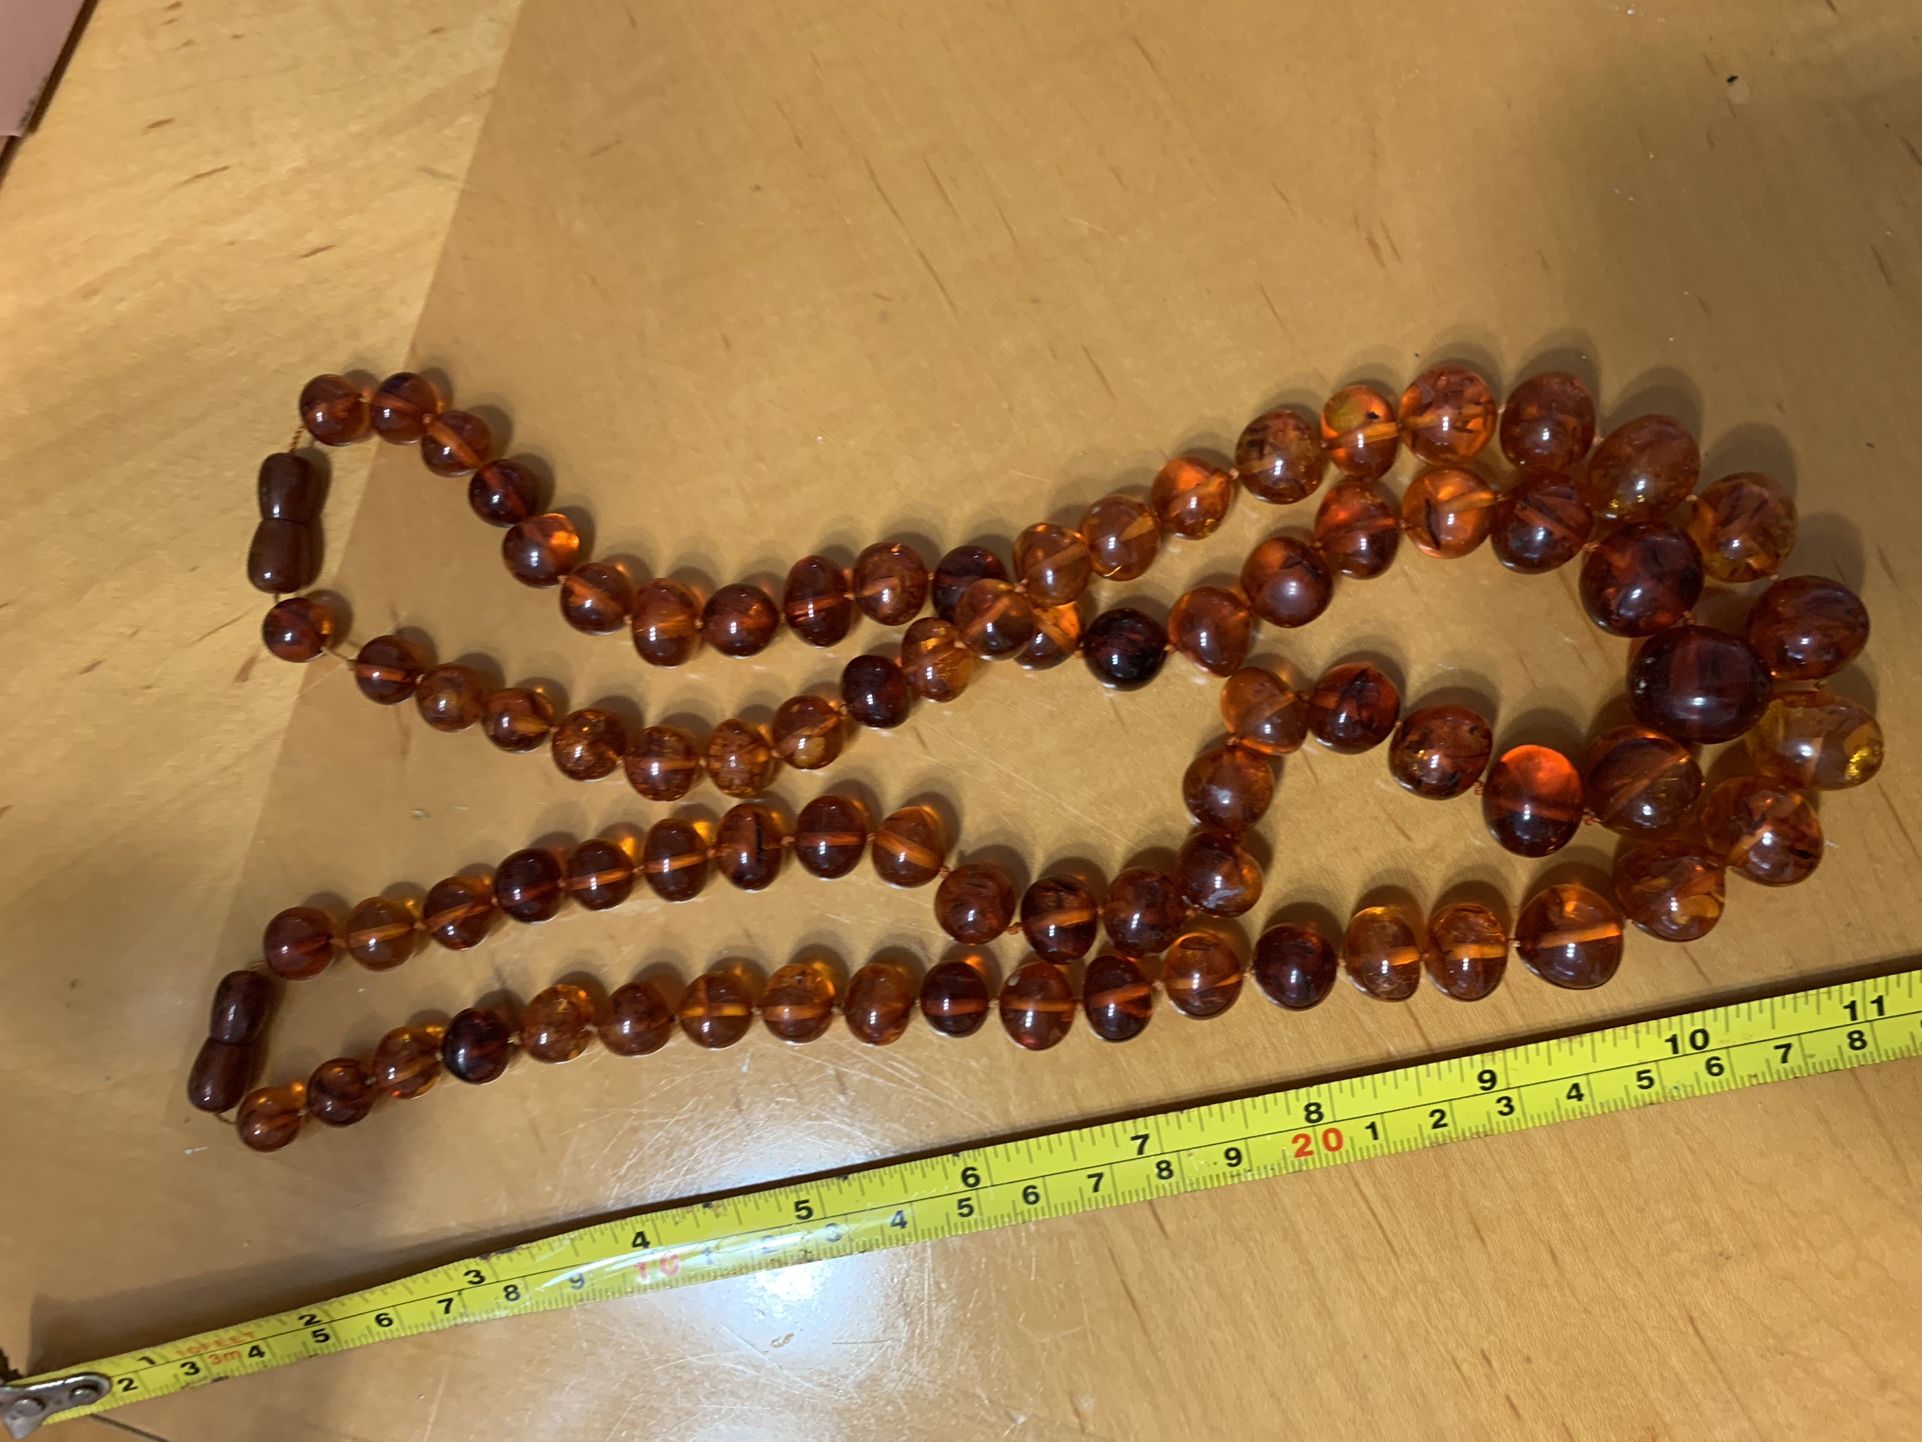 Amber bead necklace Coral Springs 33071